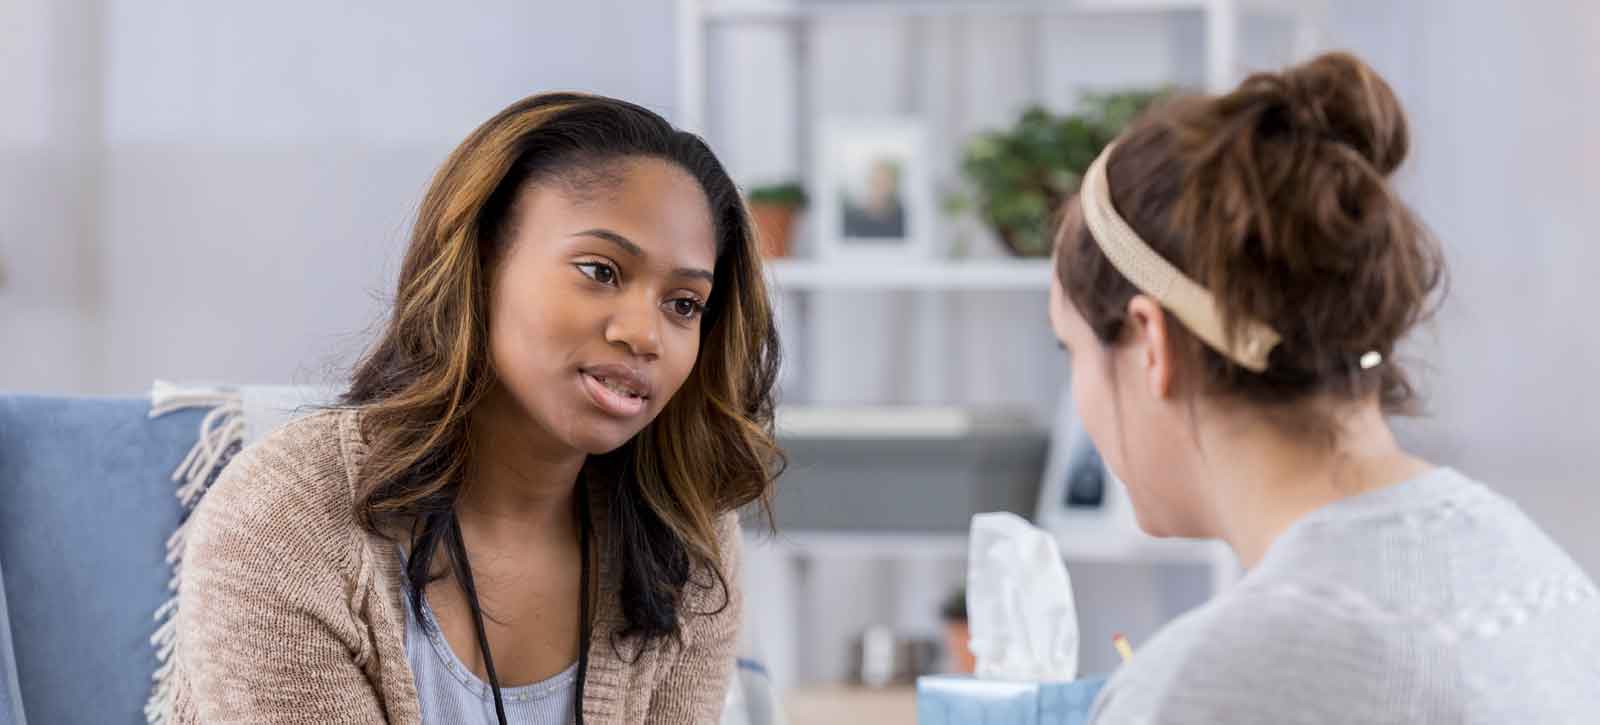 Therapy session , concerned looking counselor talking to patient